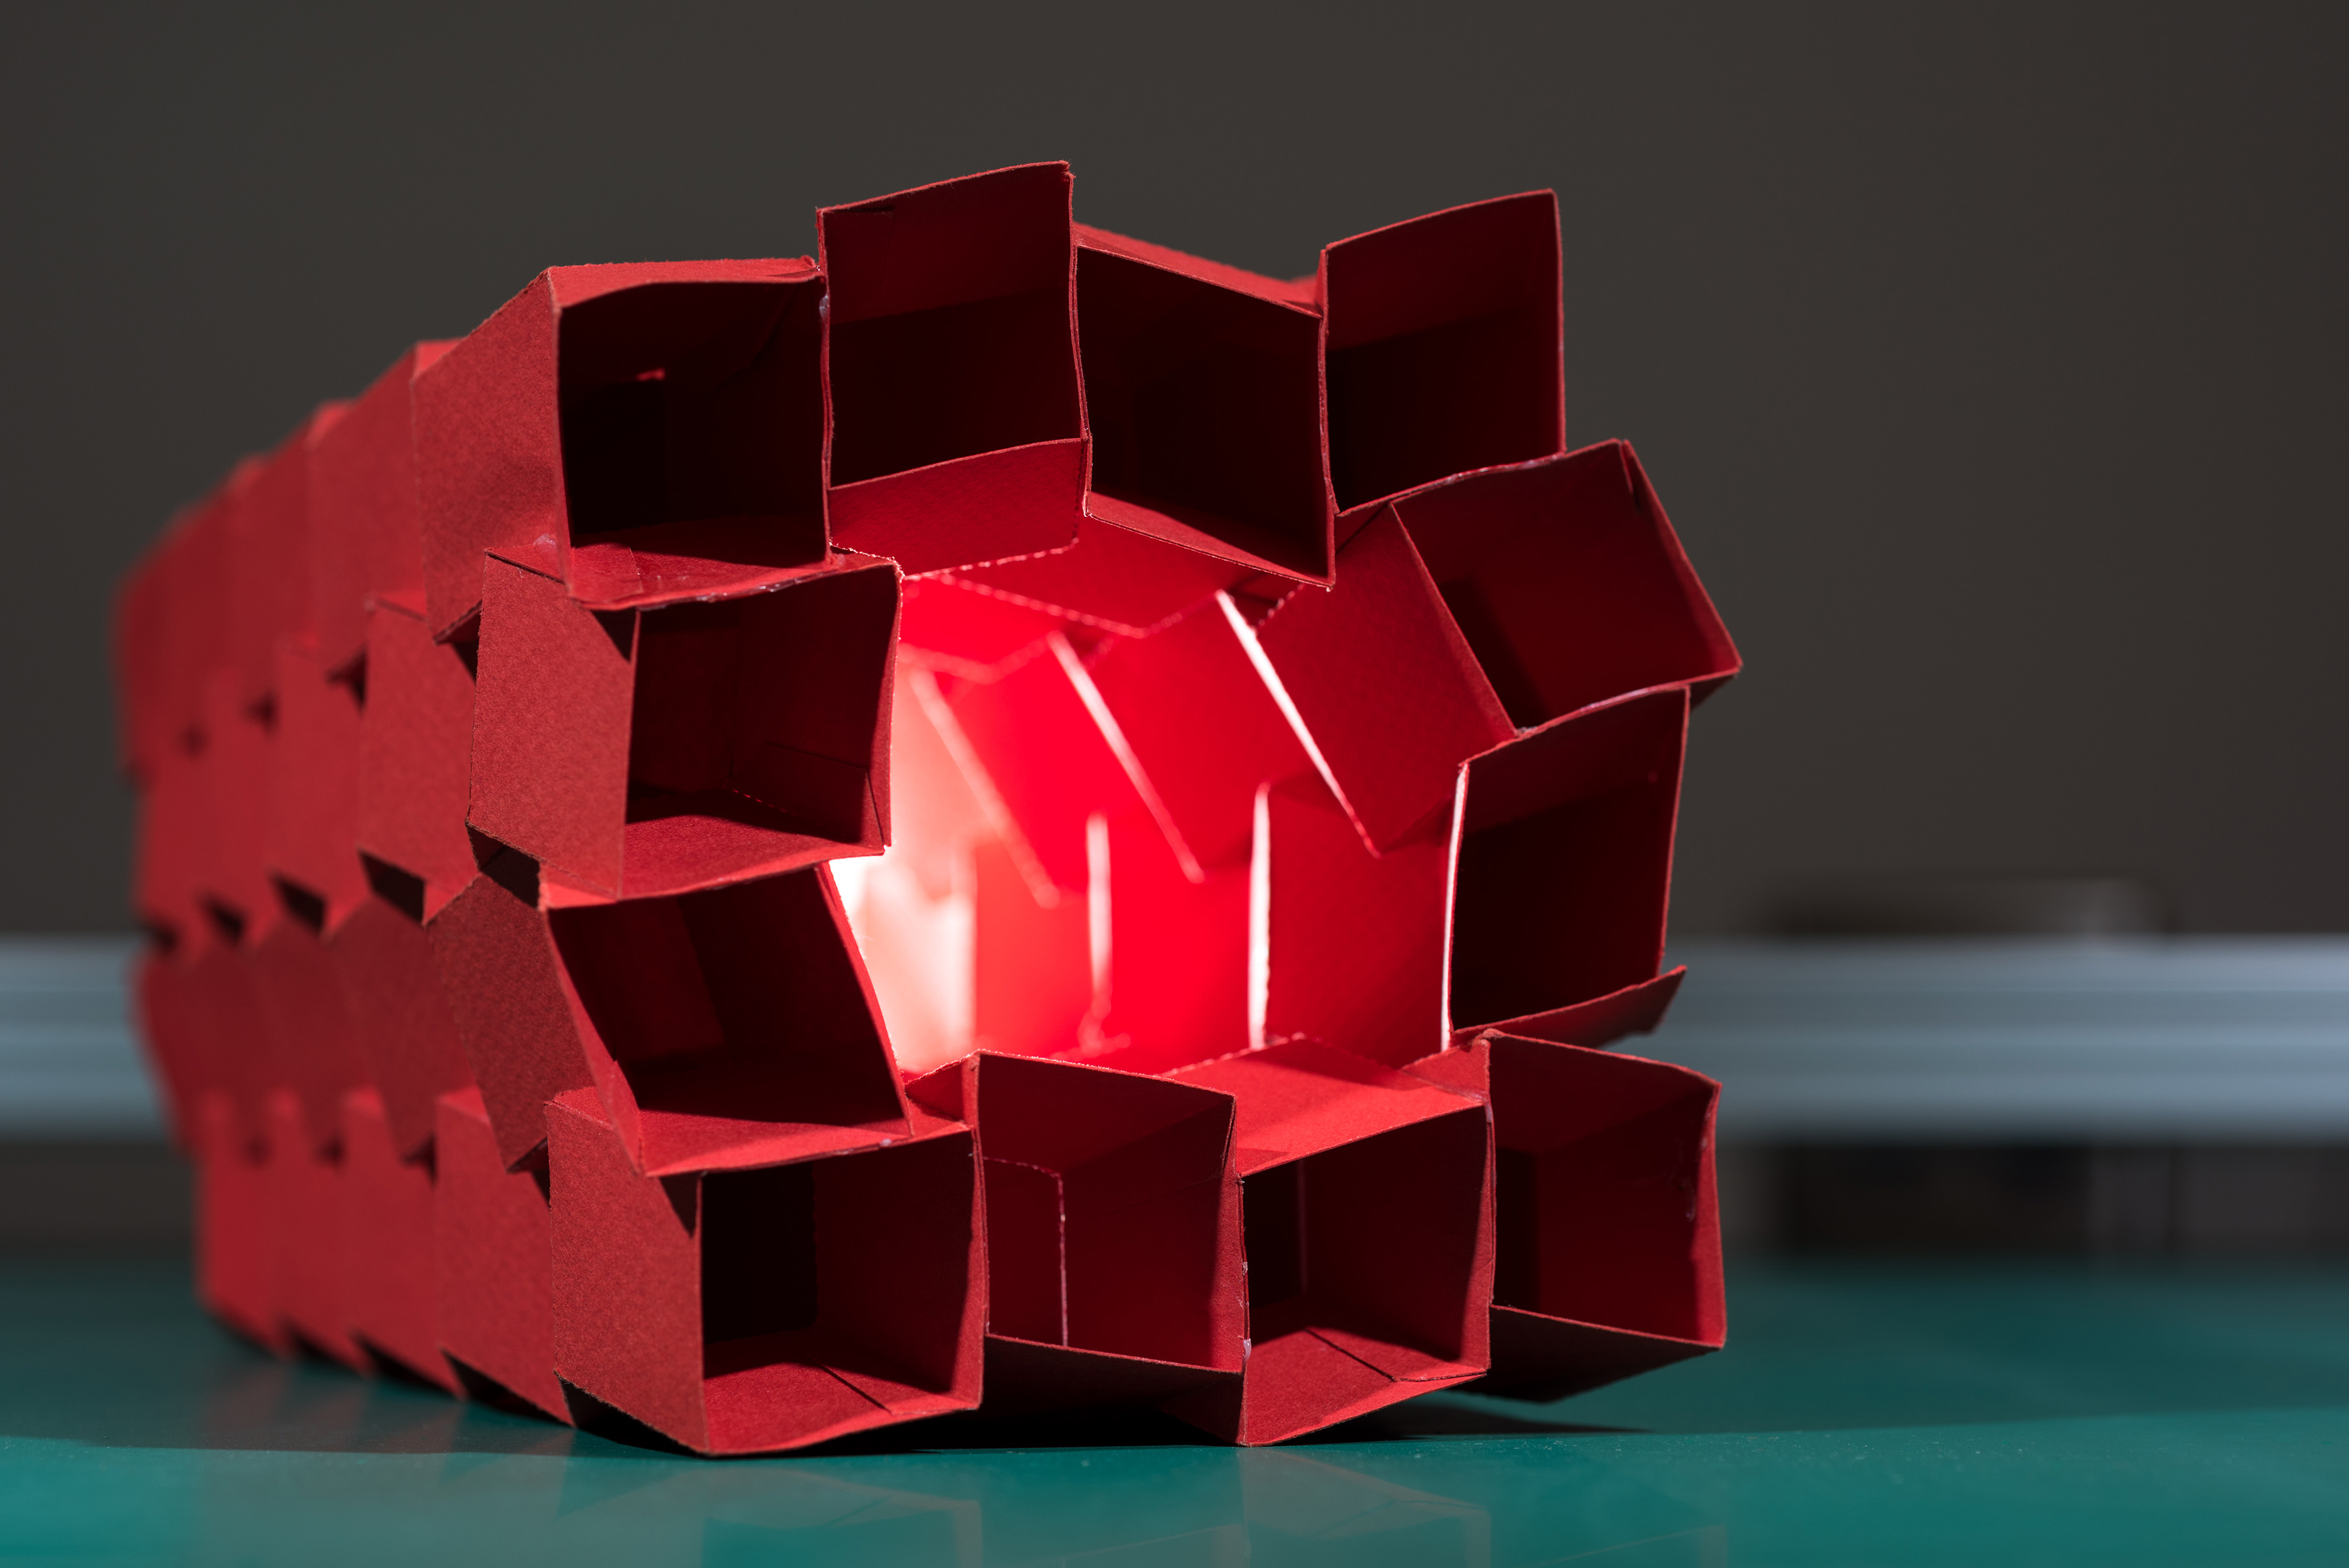 This origami structure is composed of 12 interlocking tubes that can fold flat for easy transportation. (Credit: Rob Felt, Georgia Tech)